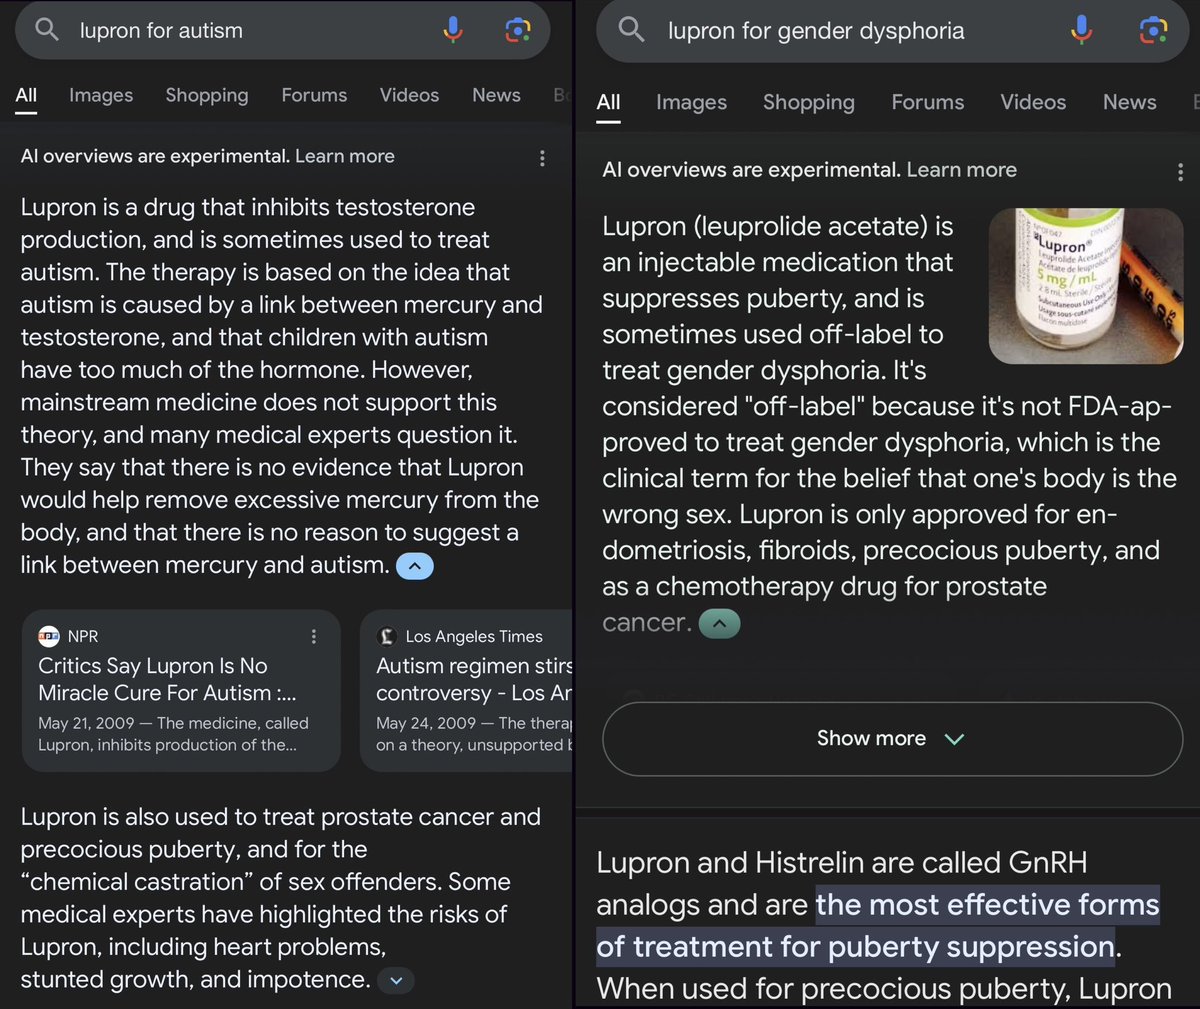 Lupron used for autism is the same Lupron used for “gender dysphoria.” Googling “Lupron for autism” shows various risks, including heart problems, stunted growth, and impotence. However, Googling “Lupron for gender dysphoria” omits these same risks highlighted by medical experts.